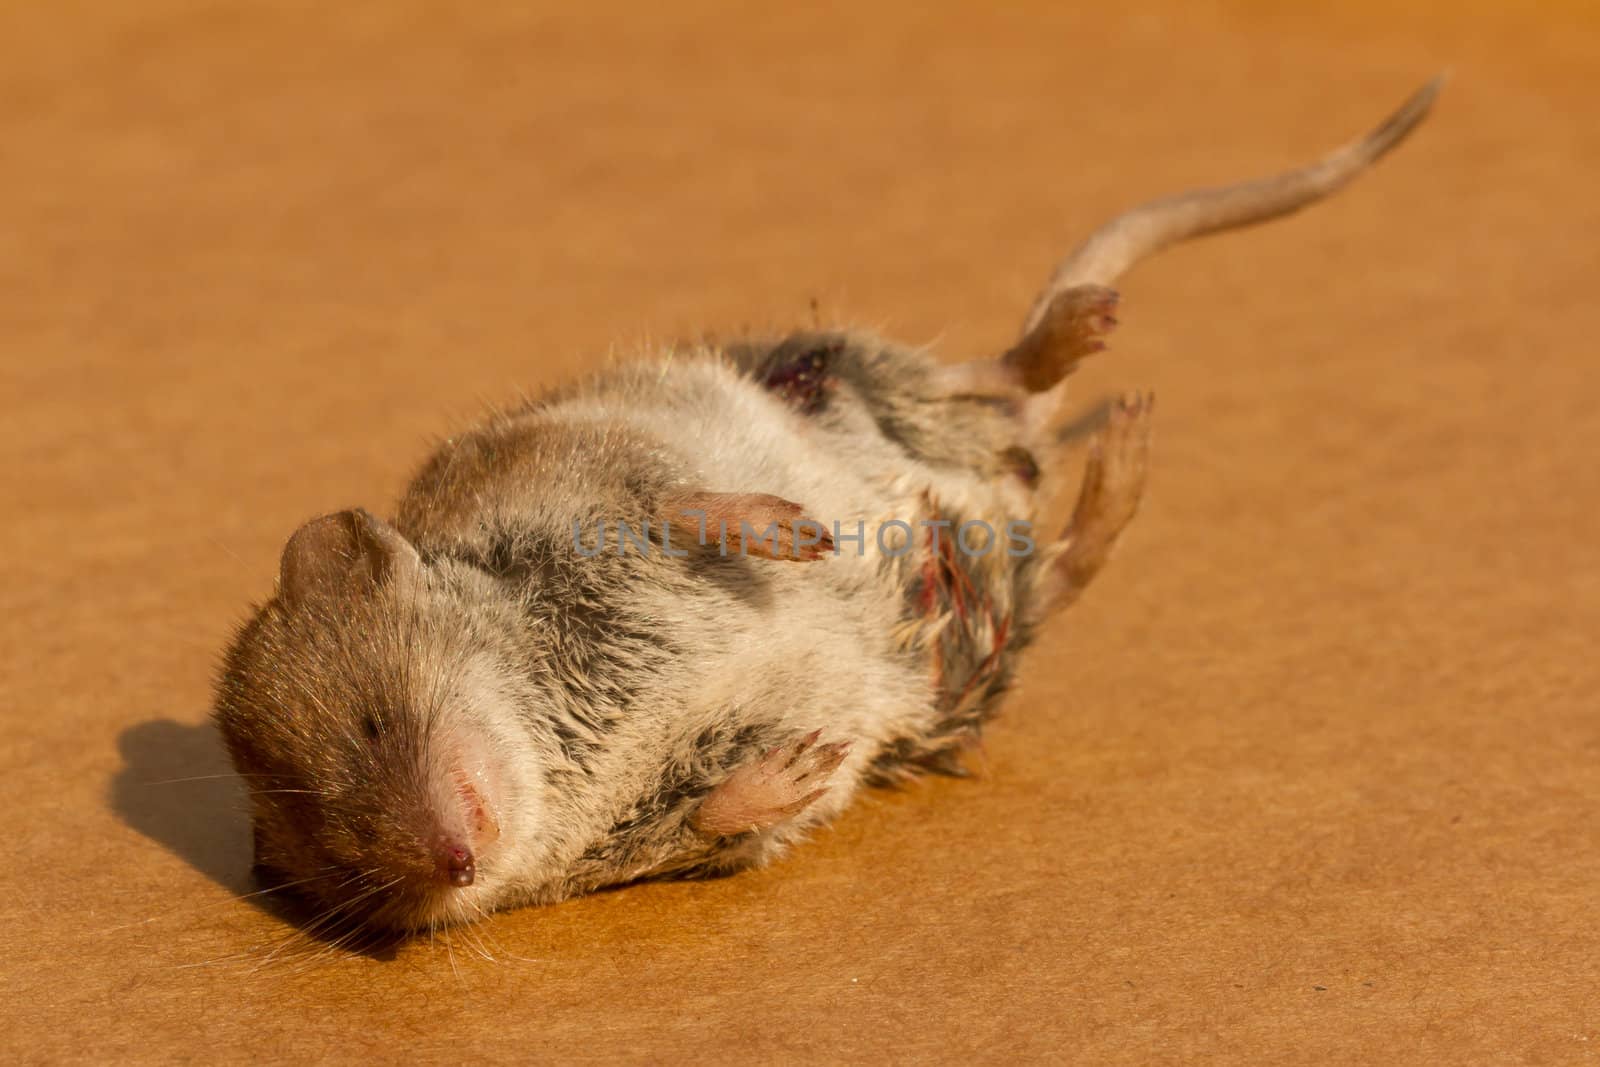 A mouse who fell victim to a cat